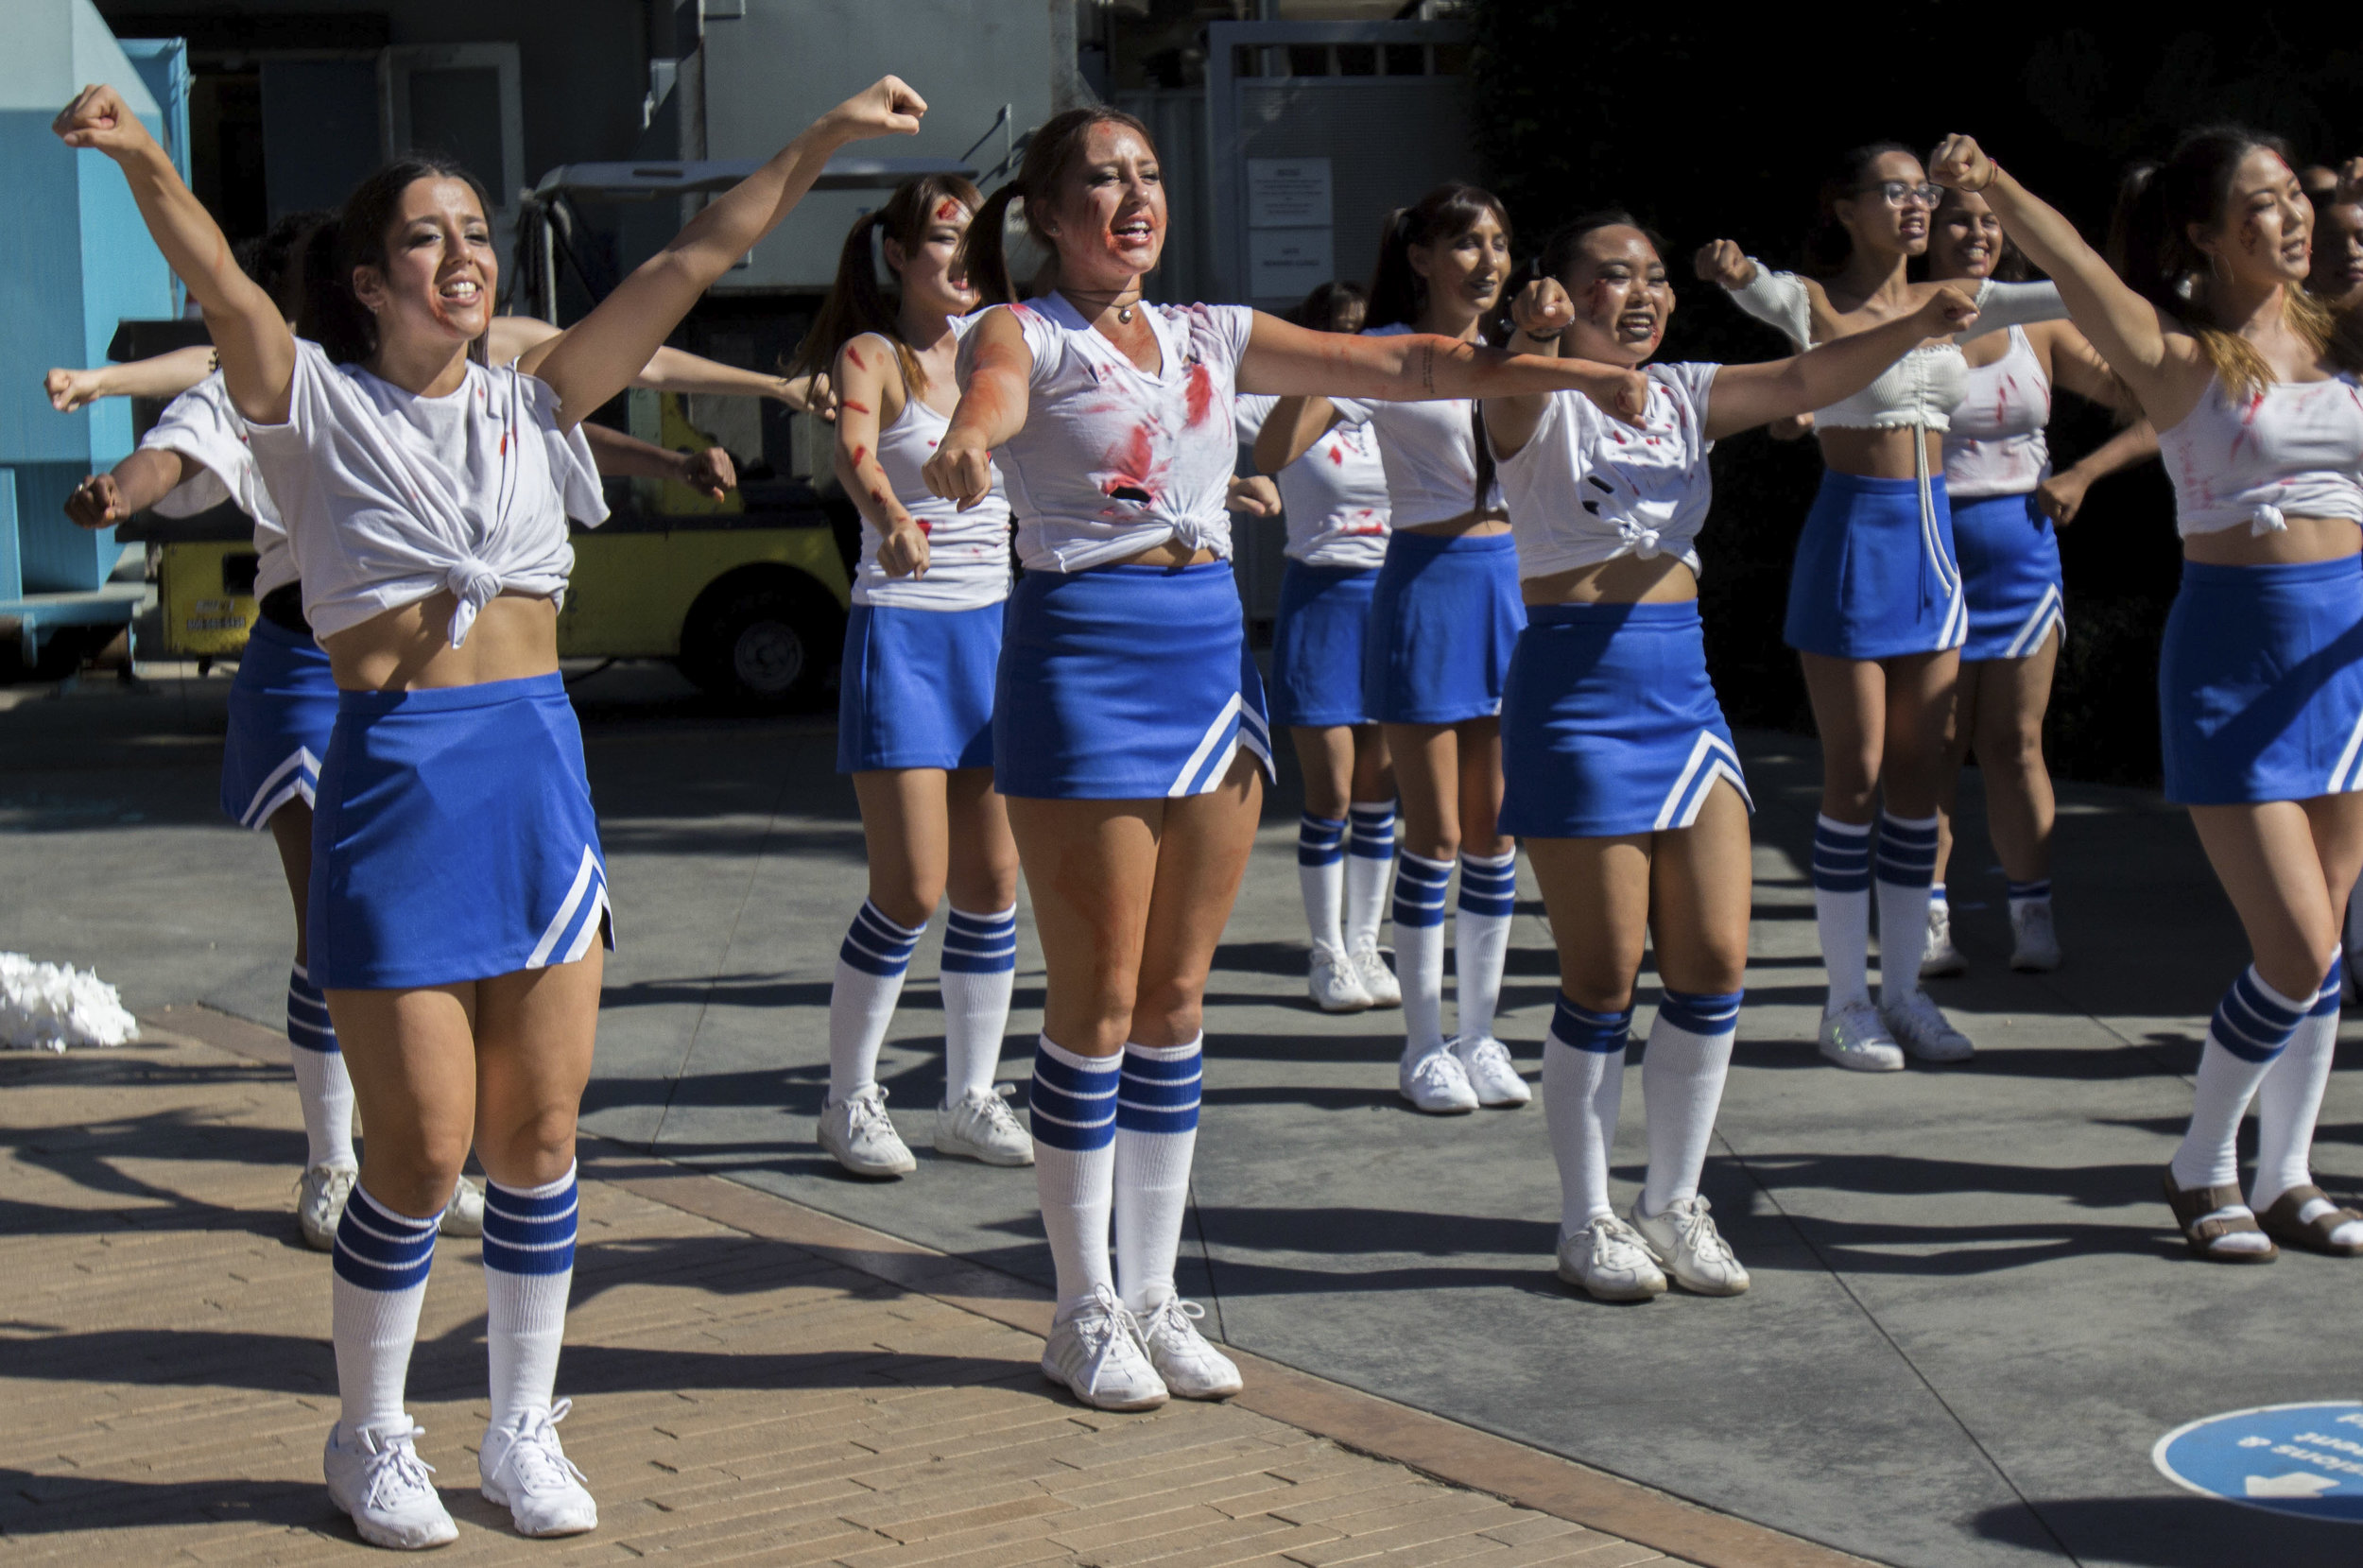  Members of the Cheer Club performing during Club Row at Santa Monica College on Thursday, October 26th, 2017 at Santa Monica, Calif. The Cheer Club gain more members compare to last year 12 member to this year 45 member. (Photo by Brian Quiroz)) 